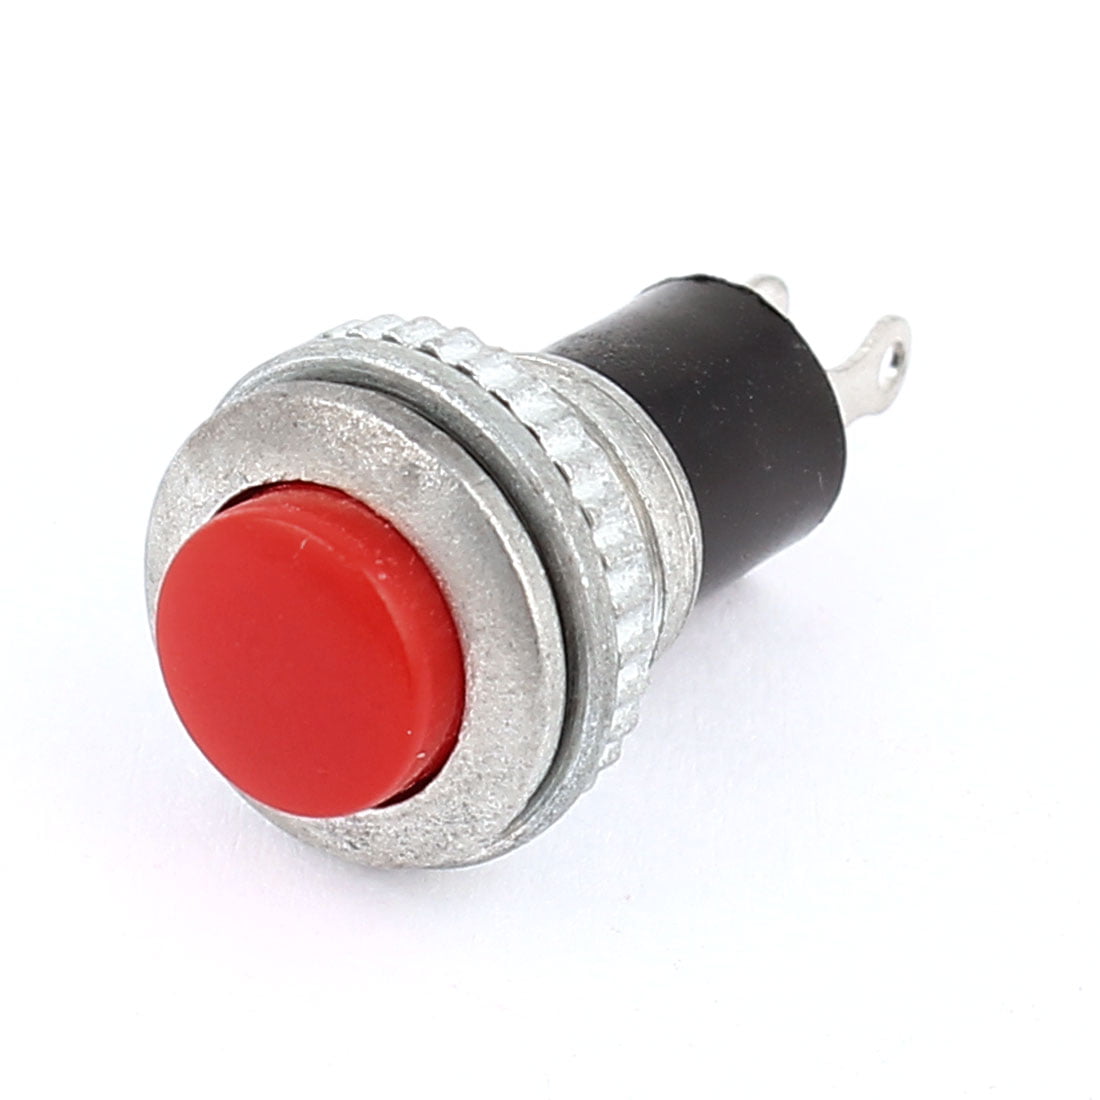 Momentary Push Button Switch SPST D 10mm Black for sale online 